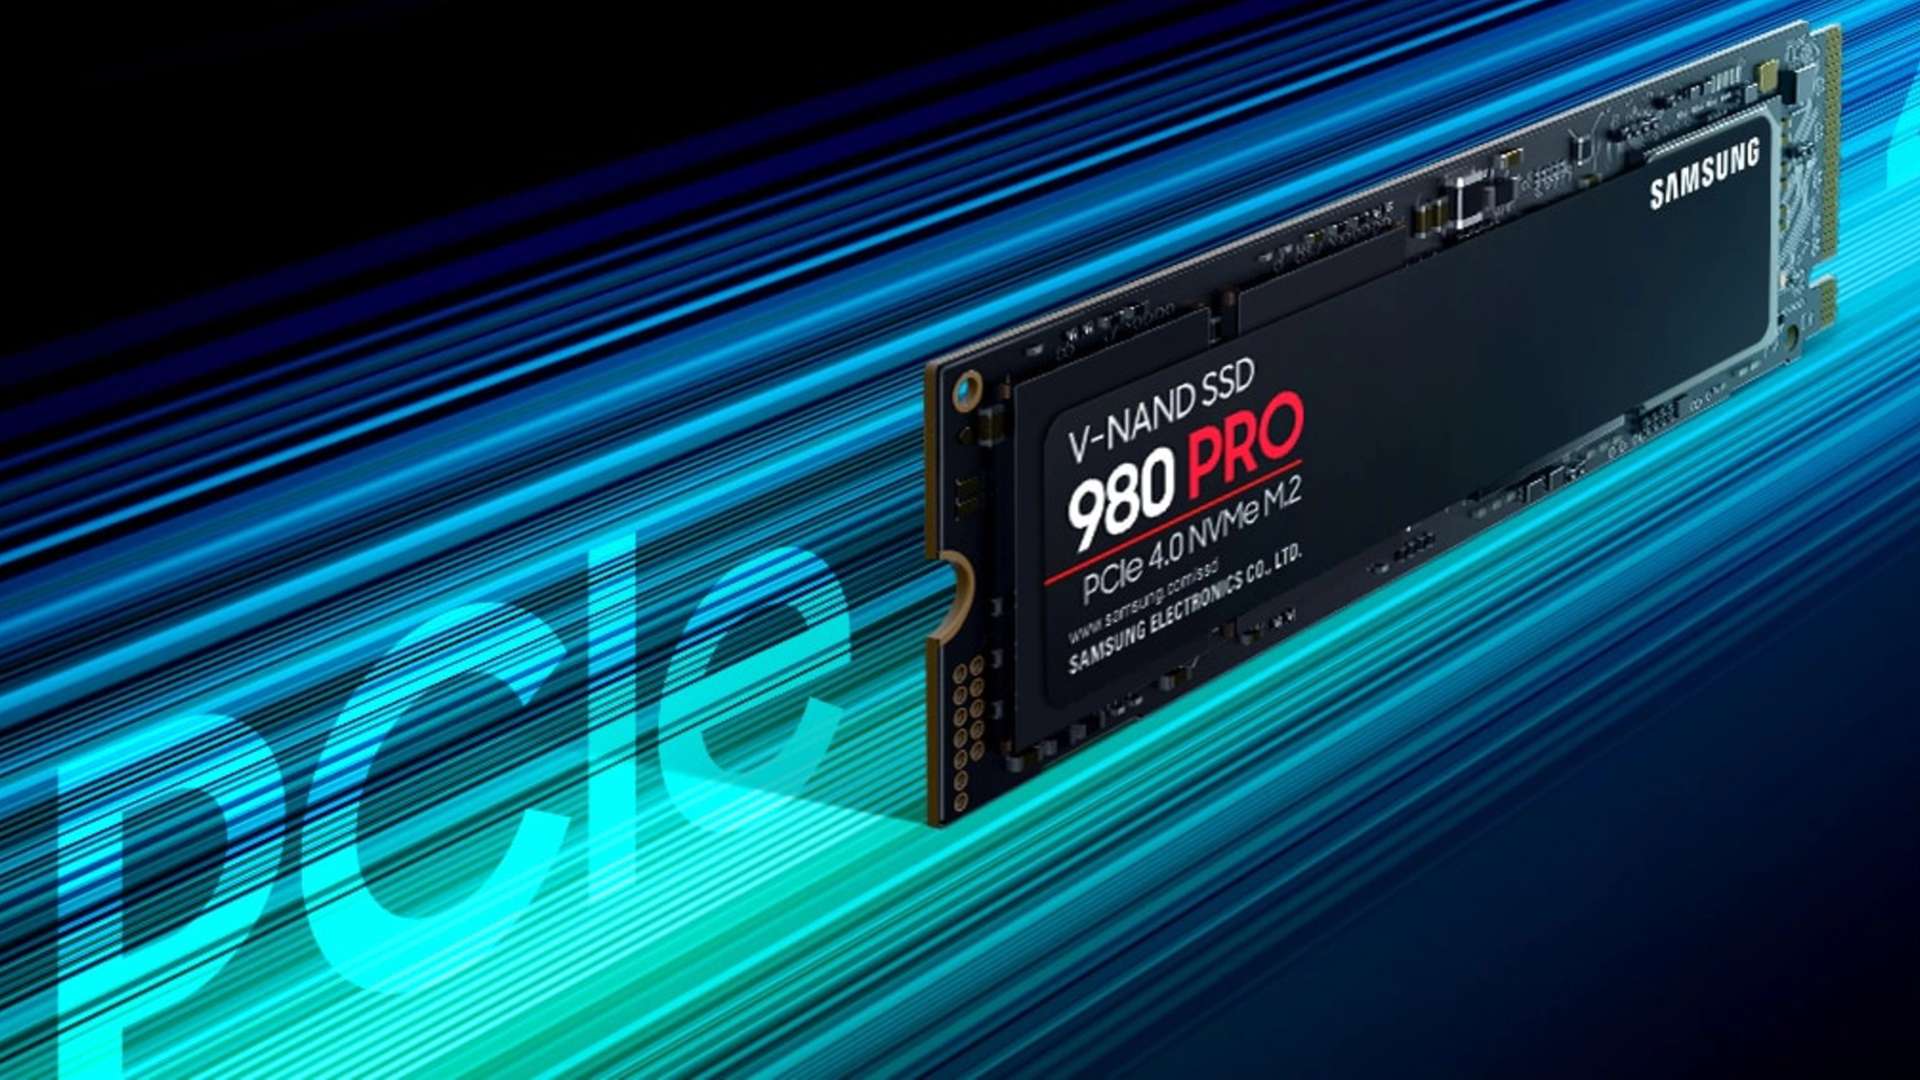 Samsung’s 980 Pro PCIe 4 NVMe SSD is up to $60 cheaper